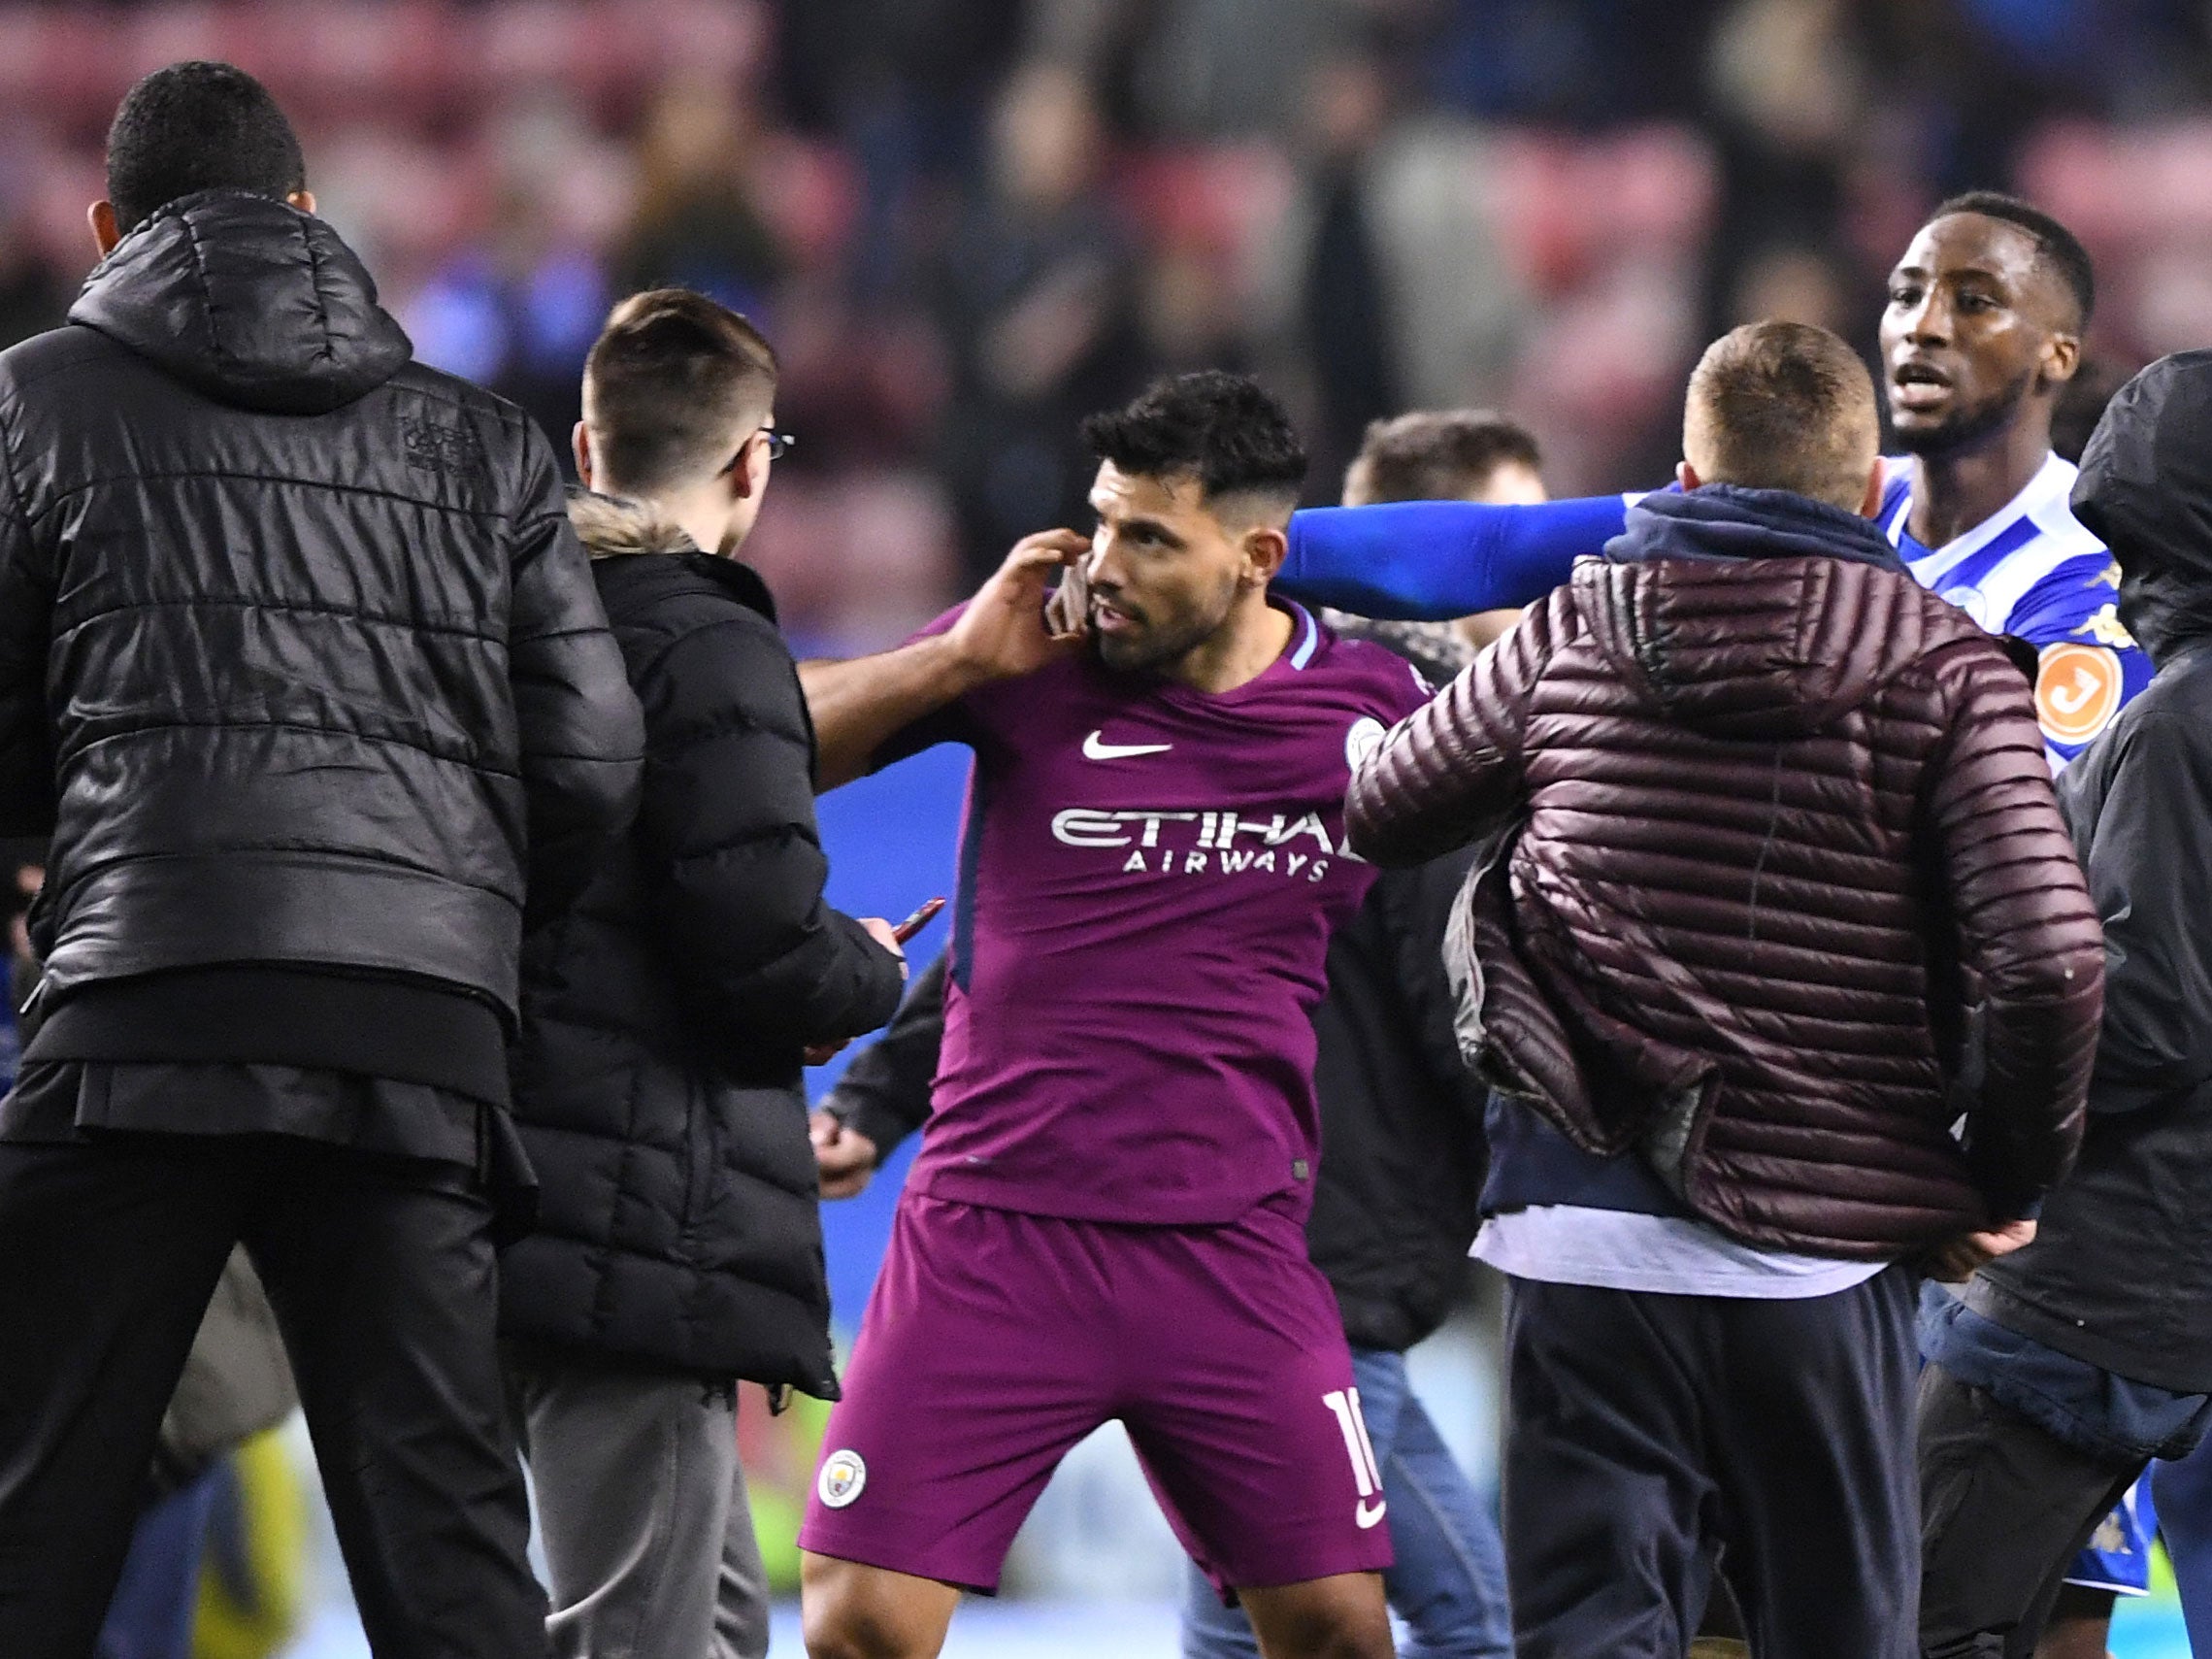 Wigan win over Manchester City marred by pitch invasion as Sergio Aguero clashes with fan